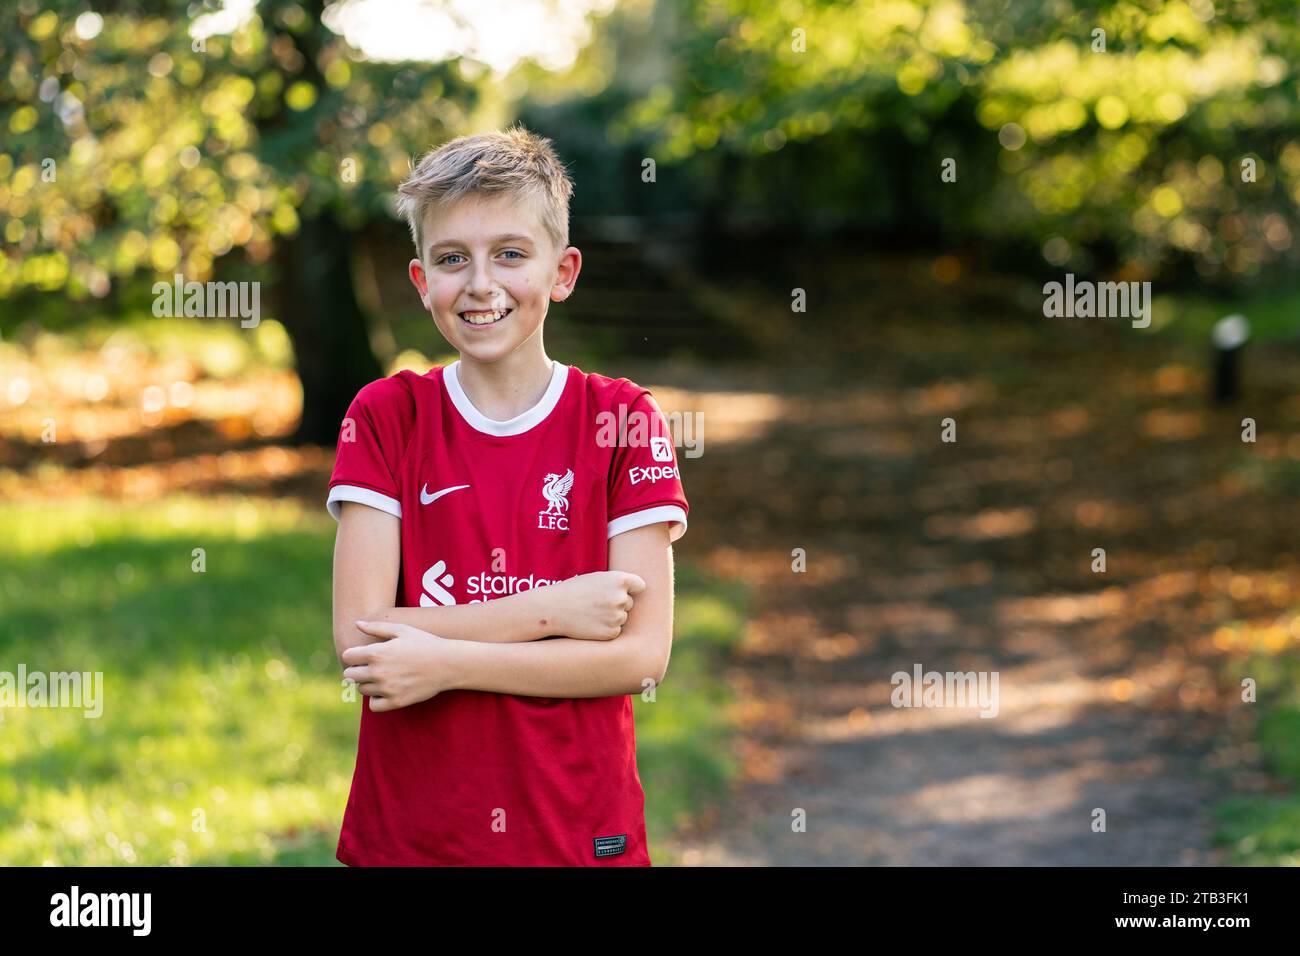 A happy child in a Liverpool jersey in a park Stock Photo